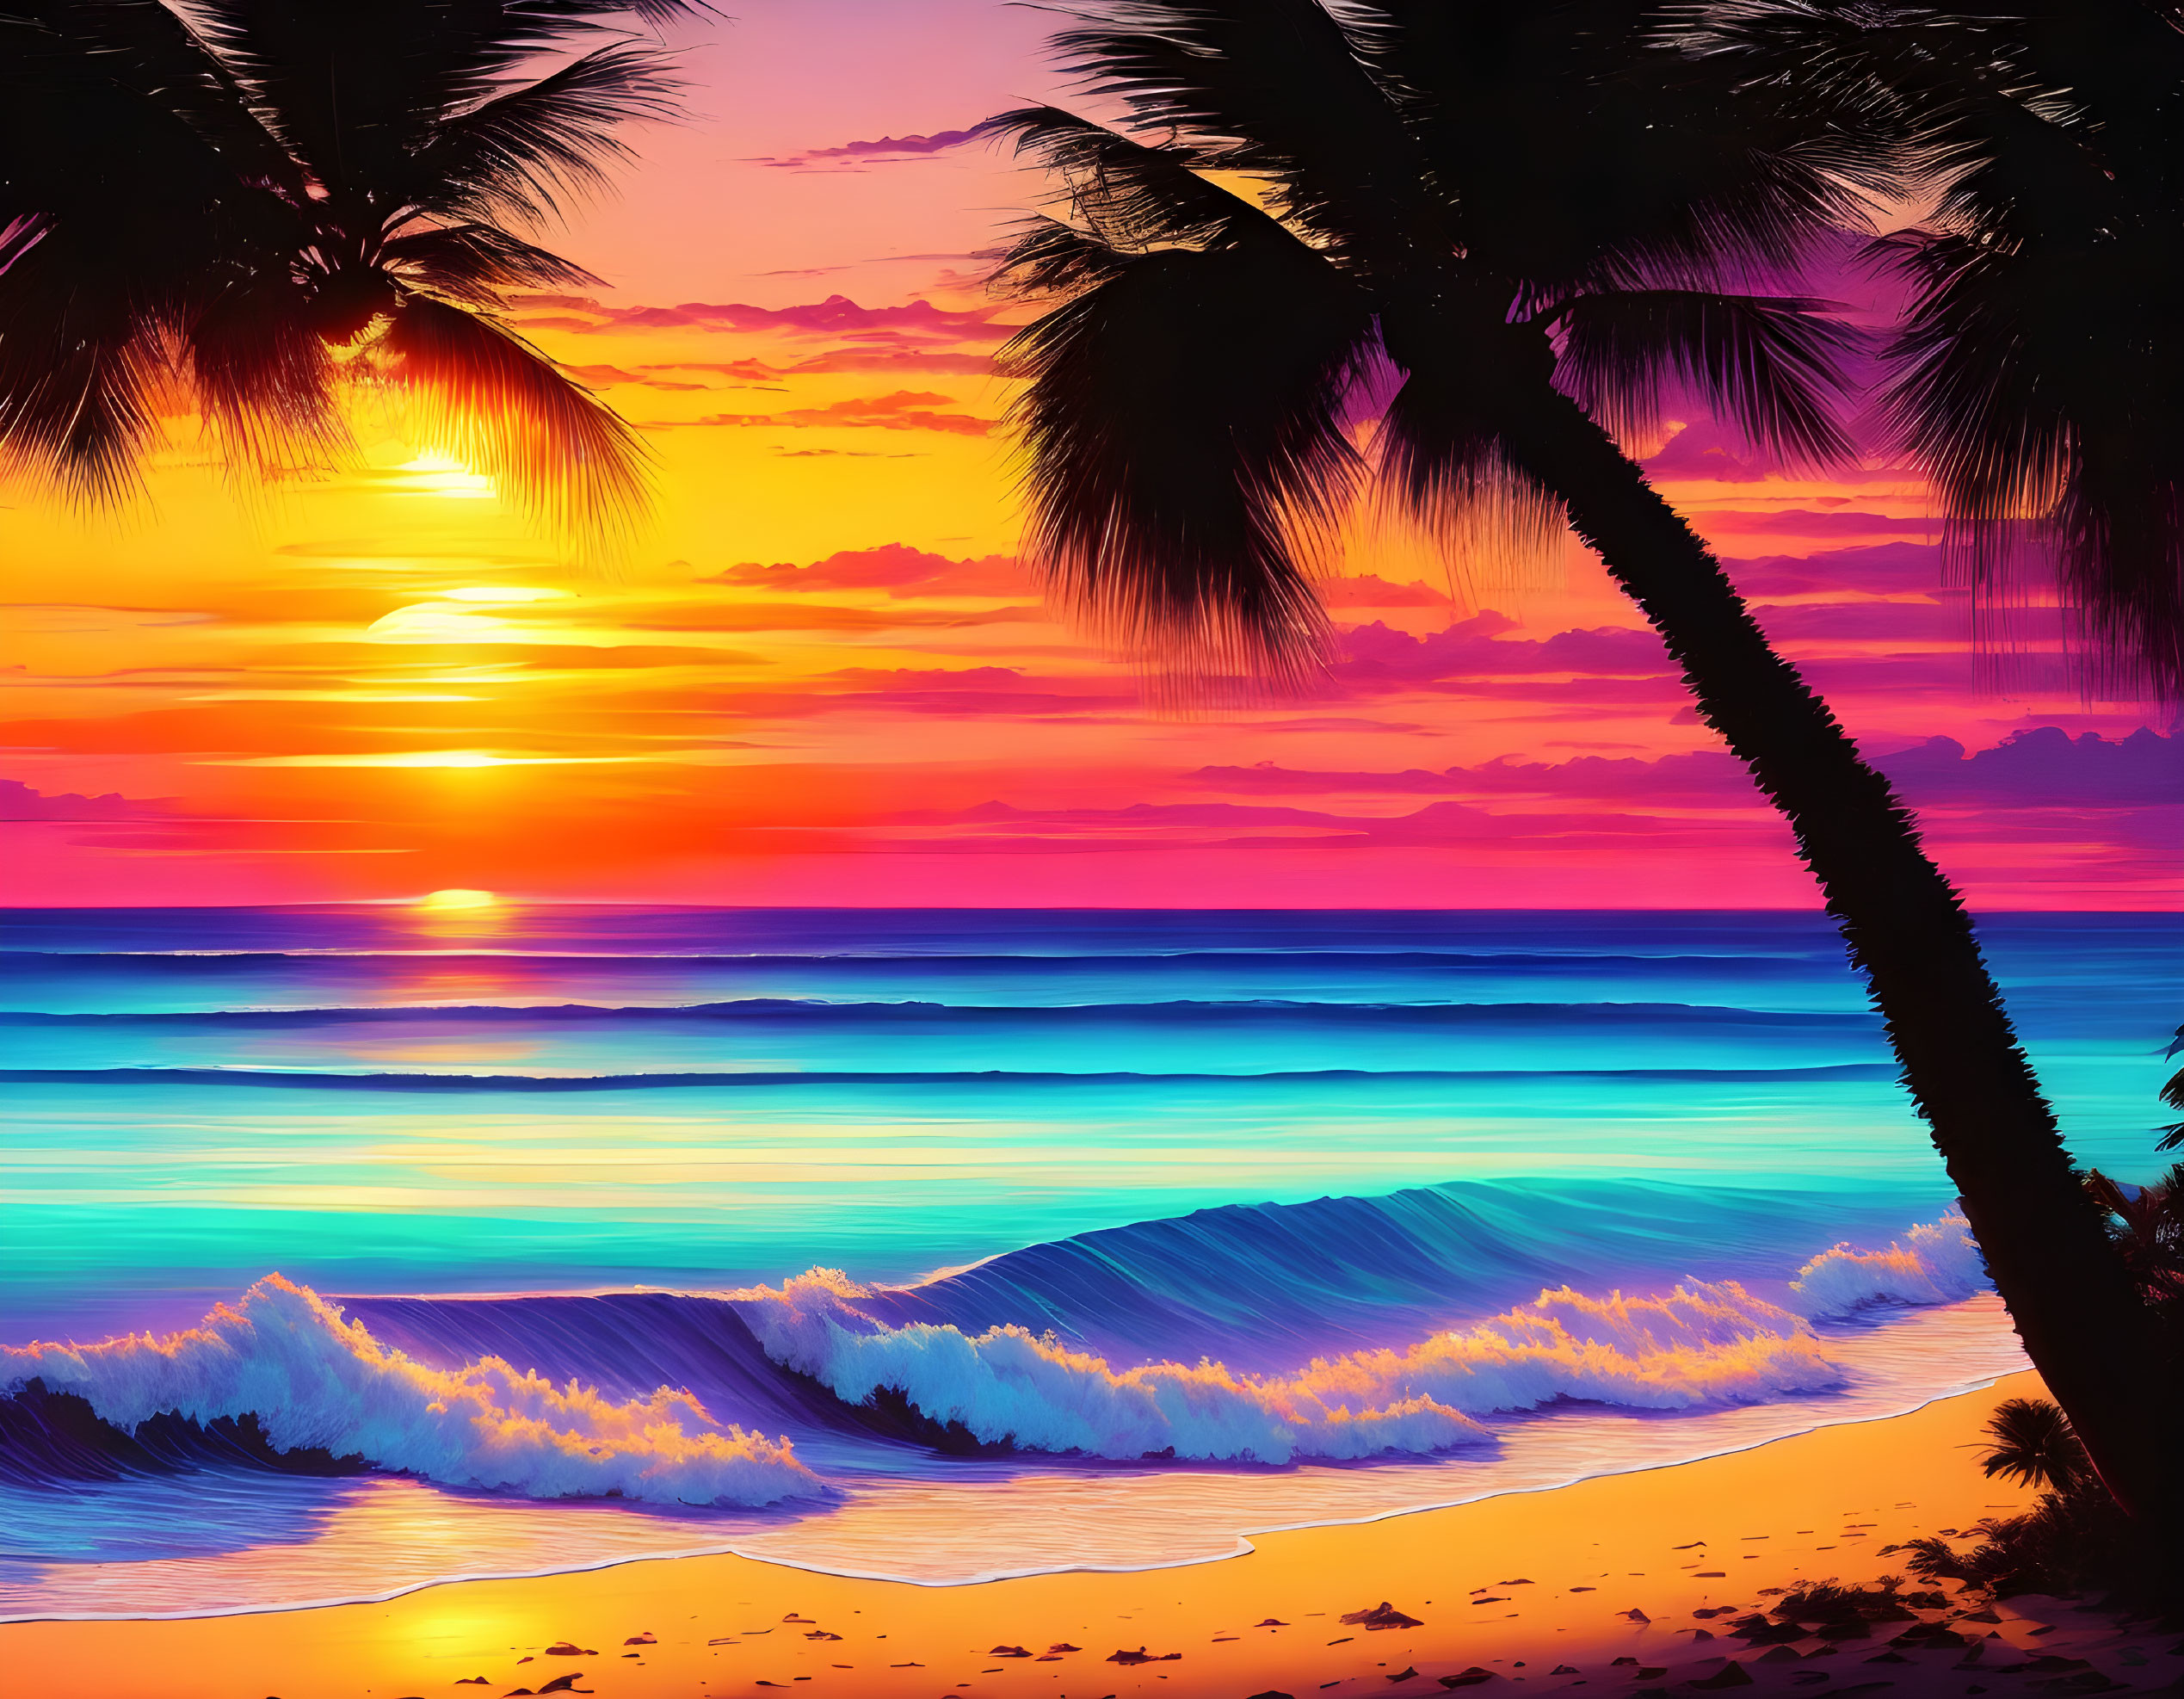 Tropical beach sunset digital artwork with palm trees and colorful sky